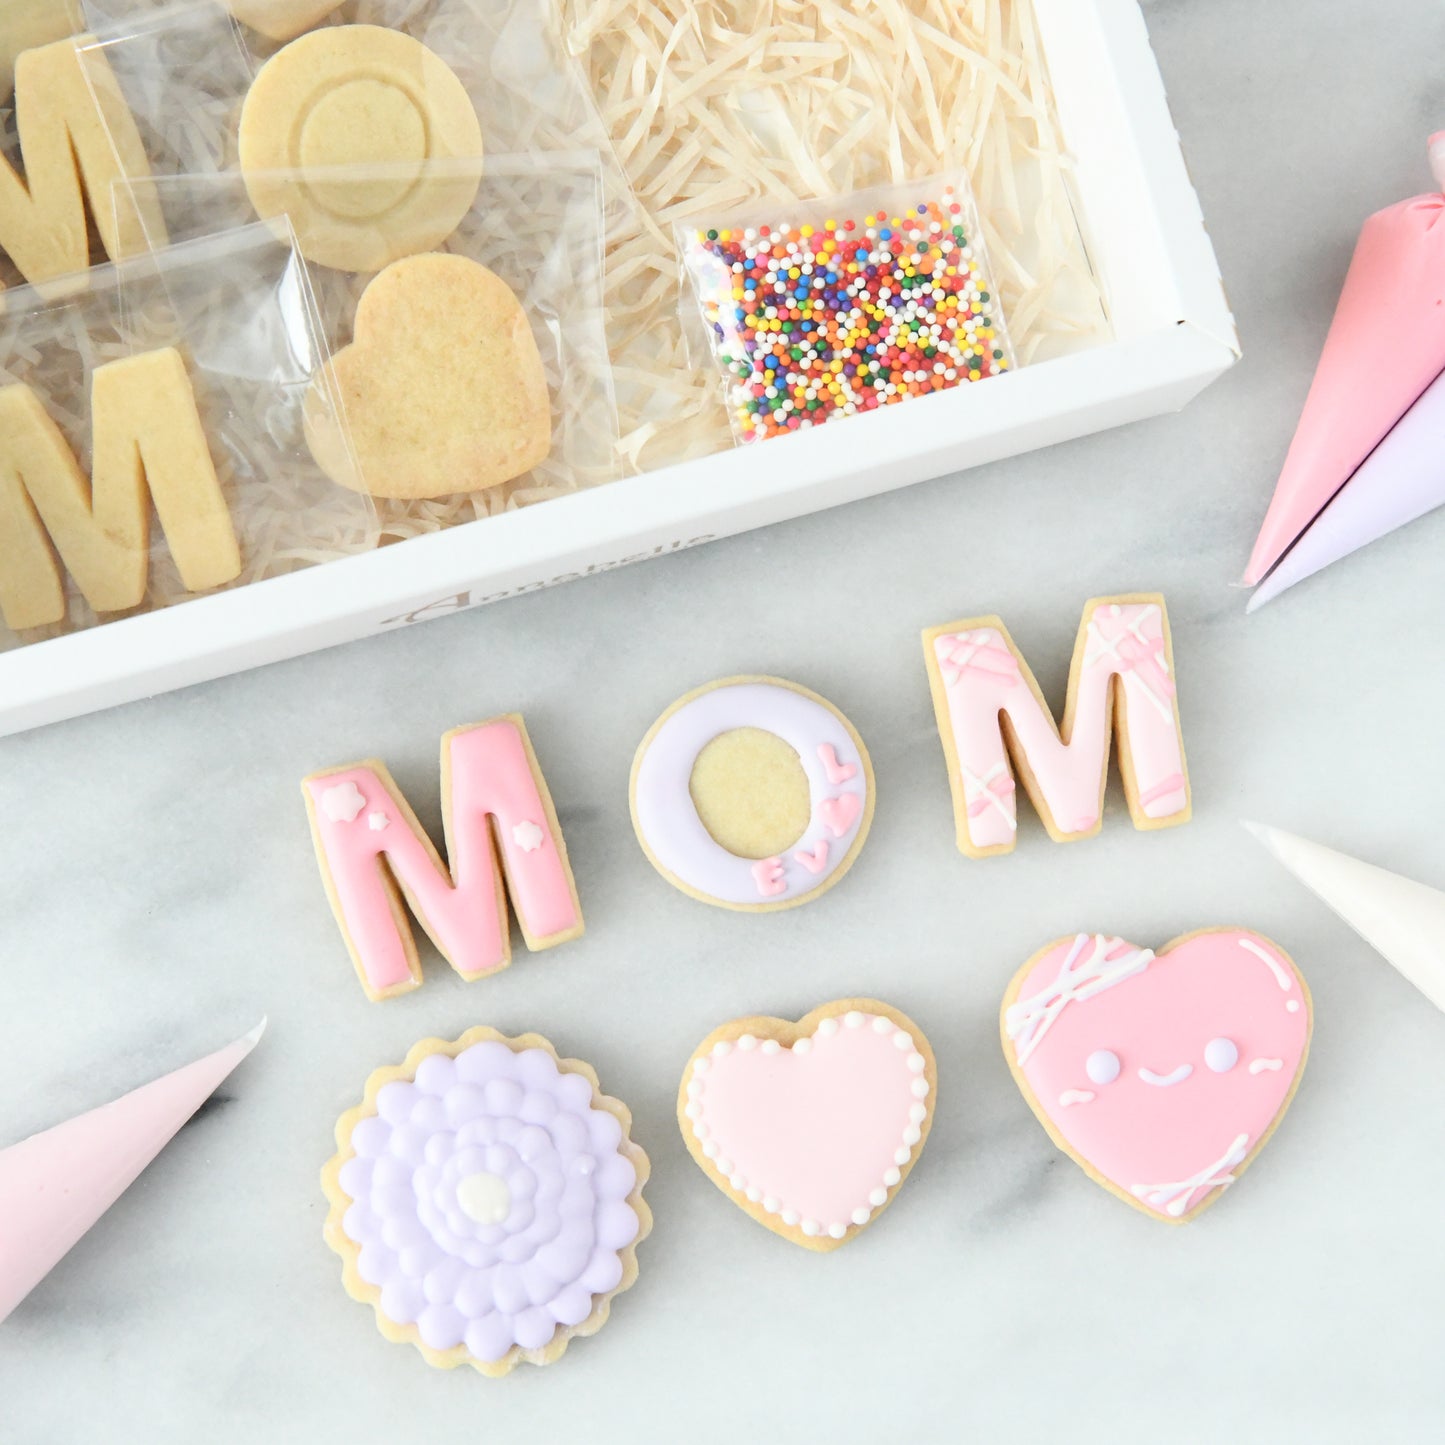 Happy Mom's Day | DIY Cookie Decorating Set | $19.90 nett only